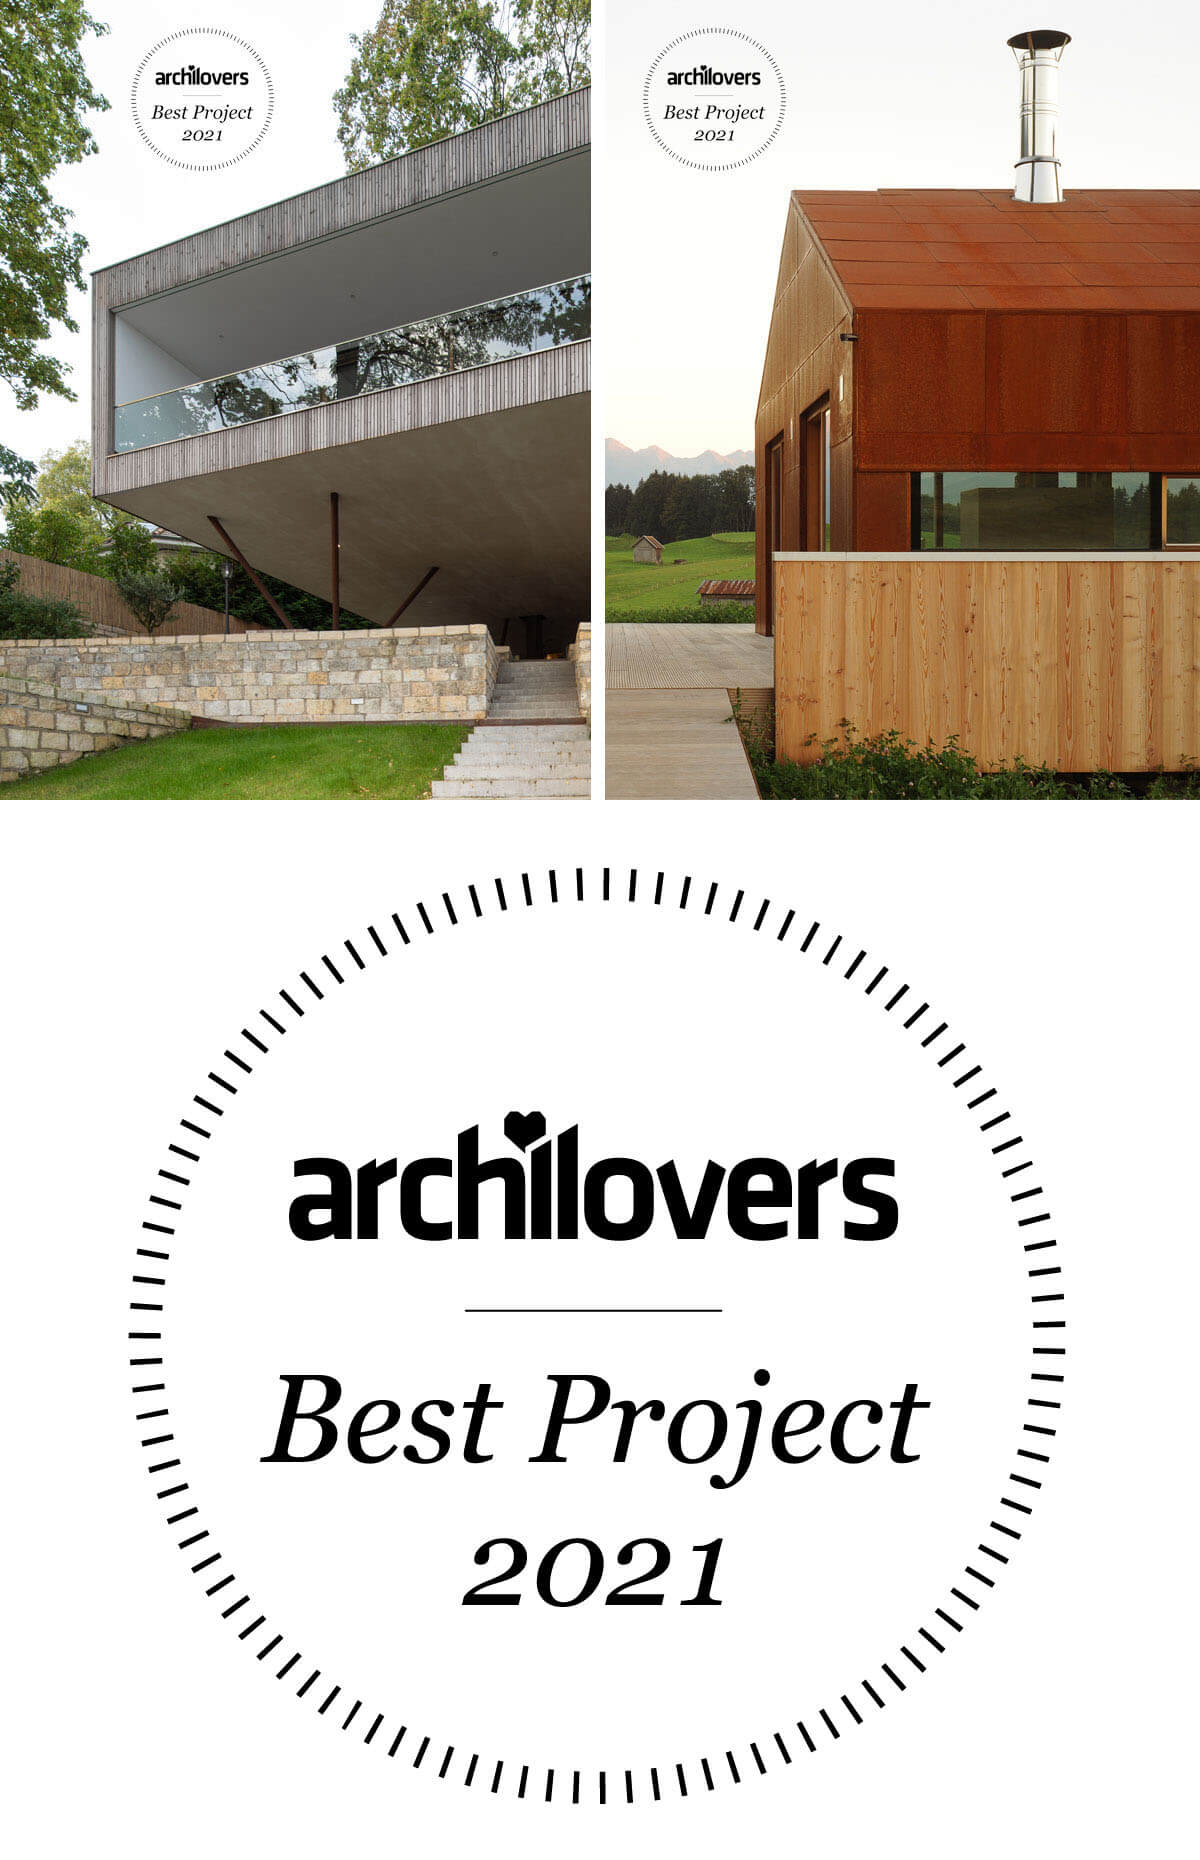 Archilovers – Best Project 2021